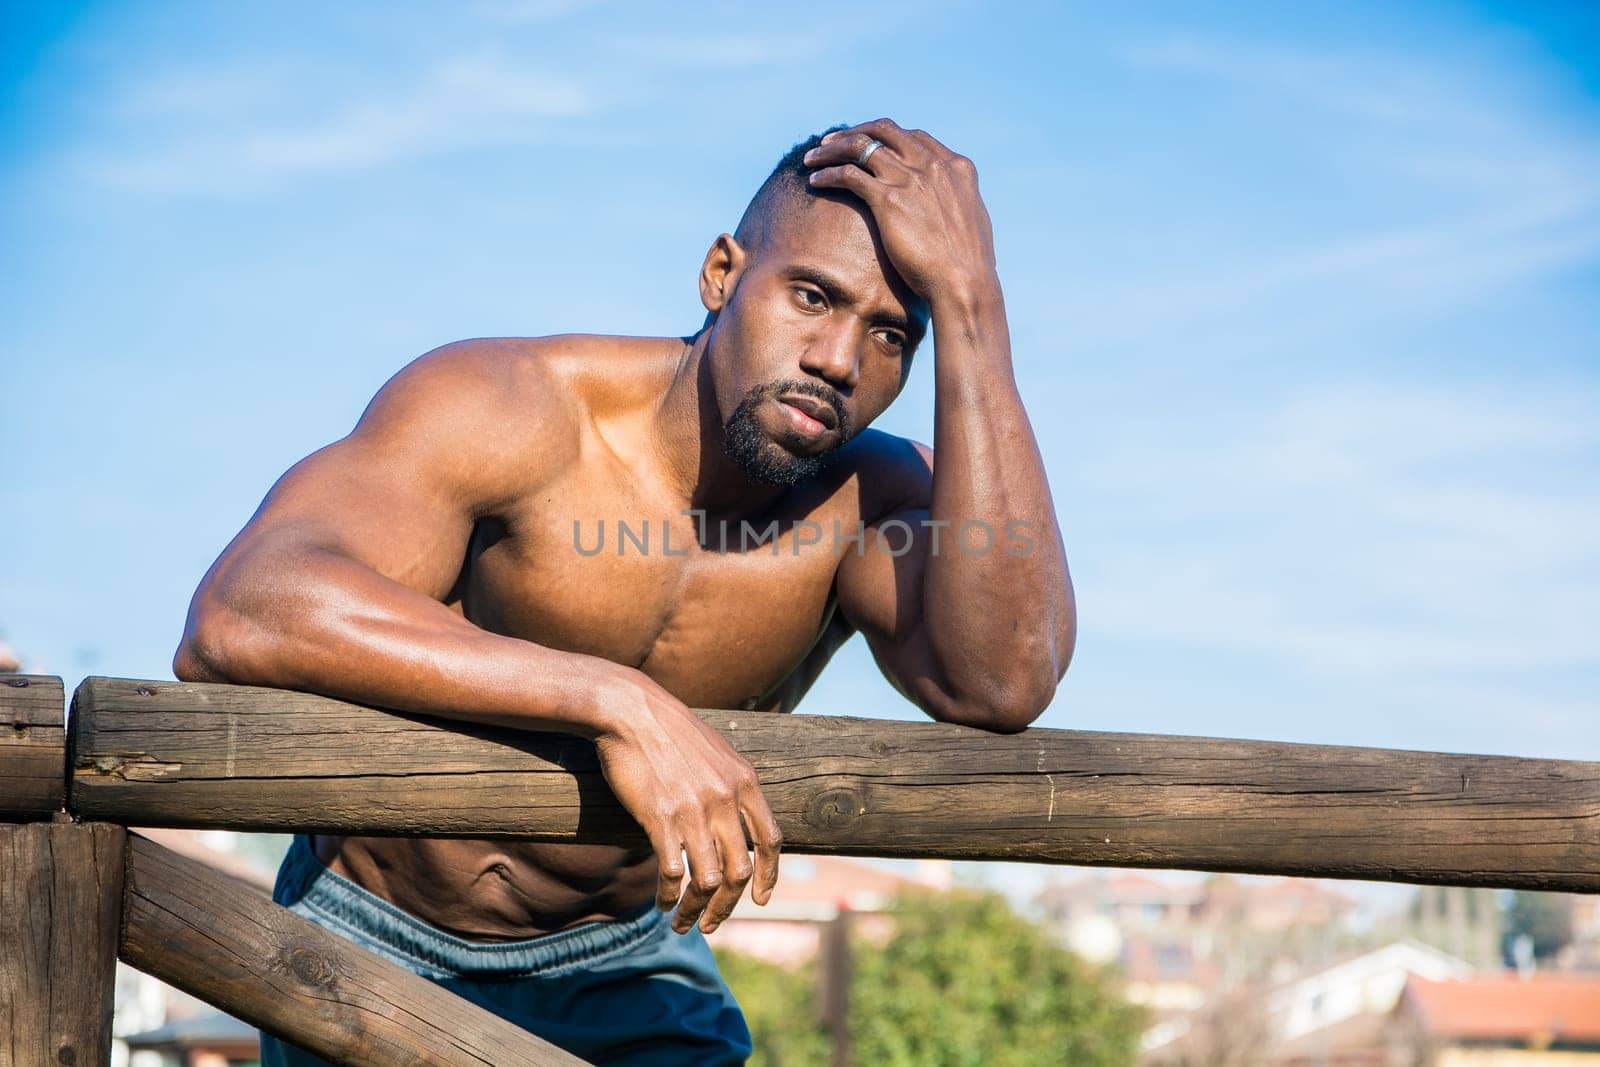 A shirtless muscular african american man leaning on a wooden fence in a city park in a sunny day